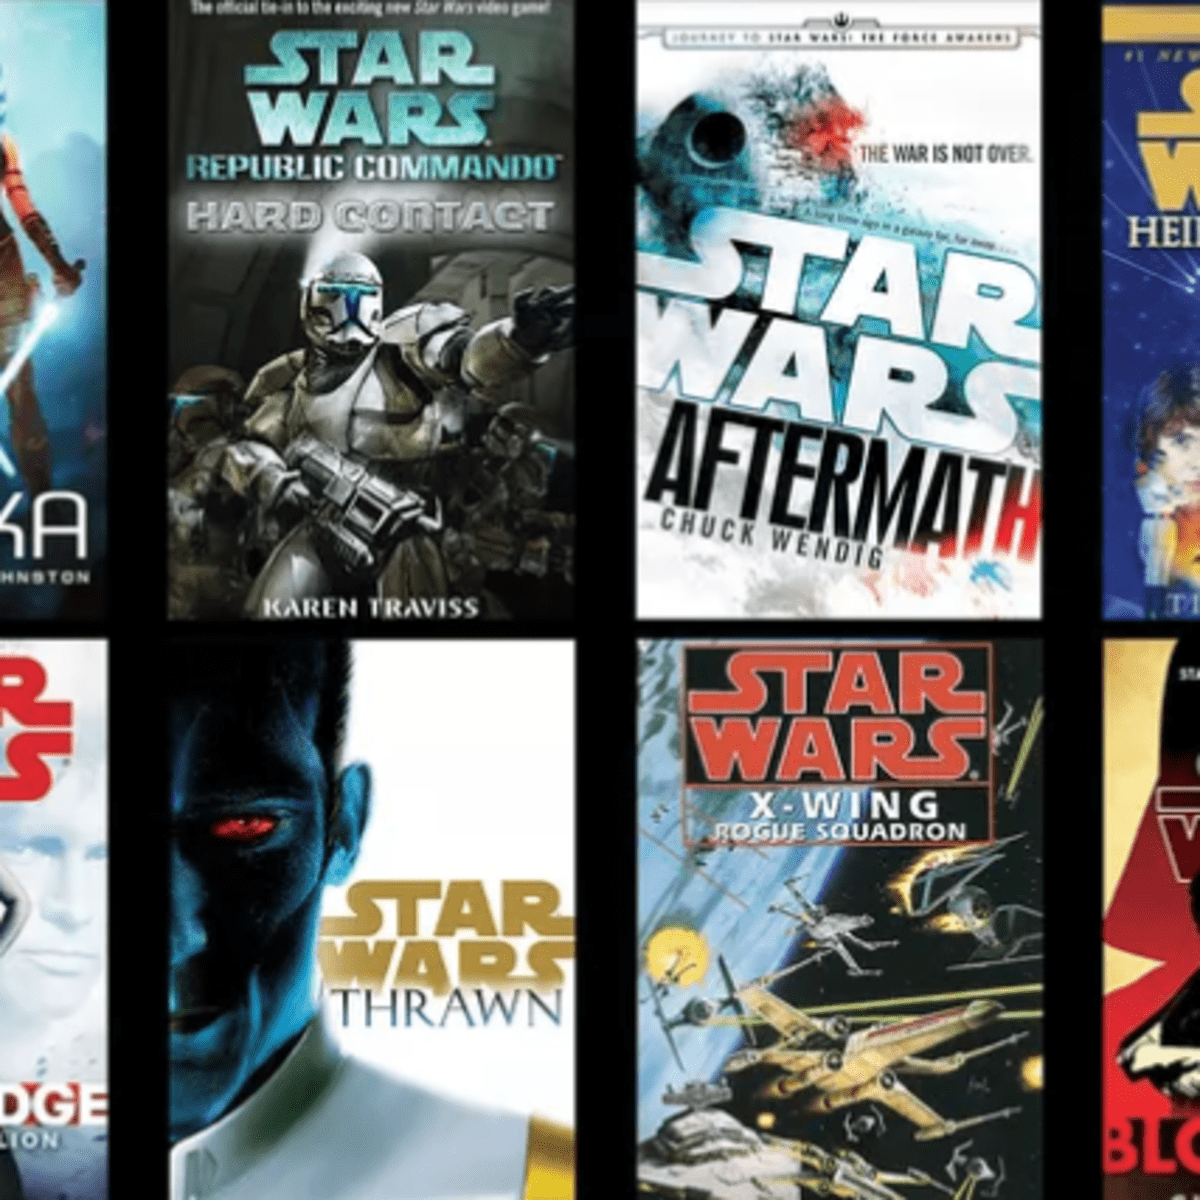 Star Wars books in an order: Here's a look at how you can read all